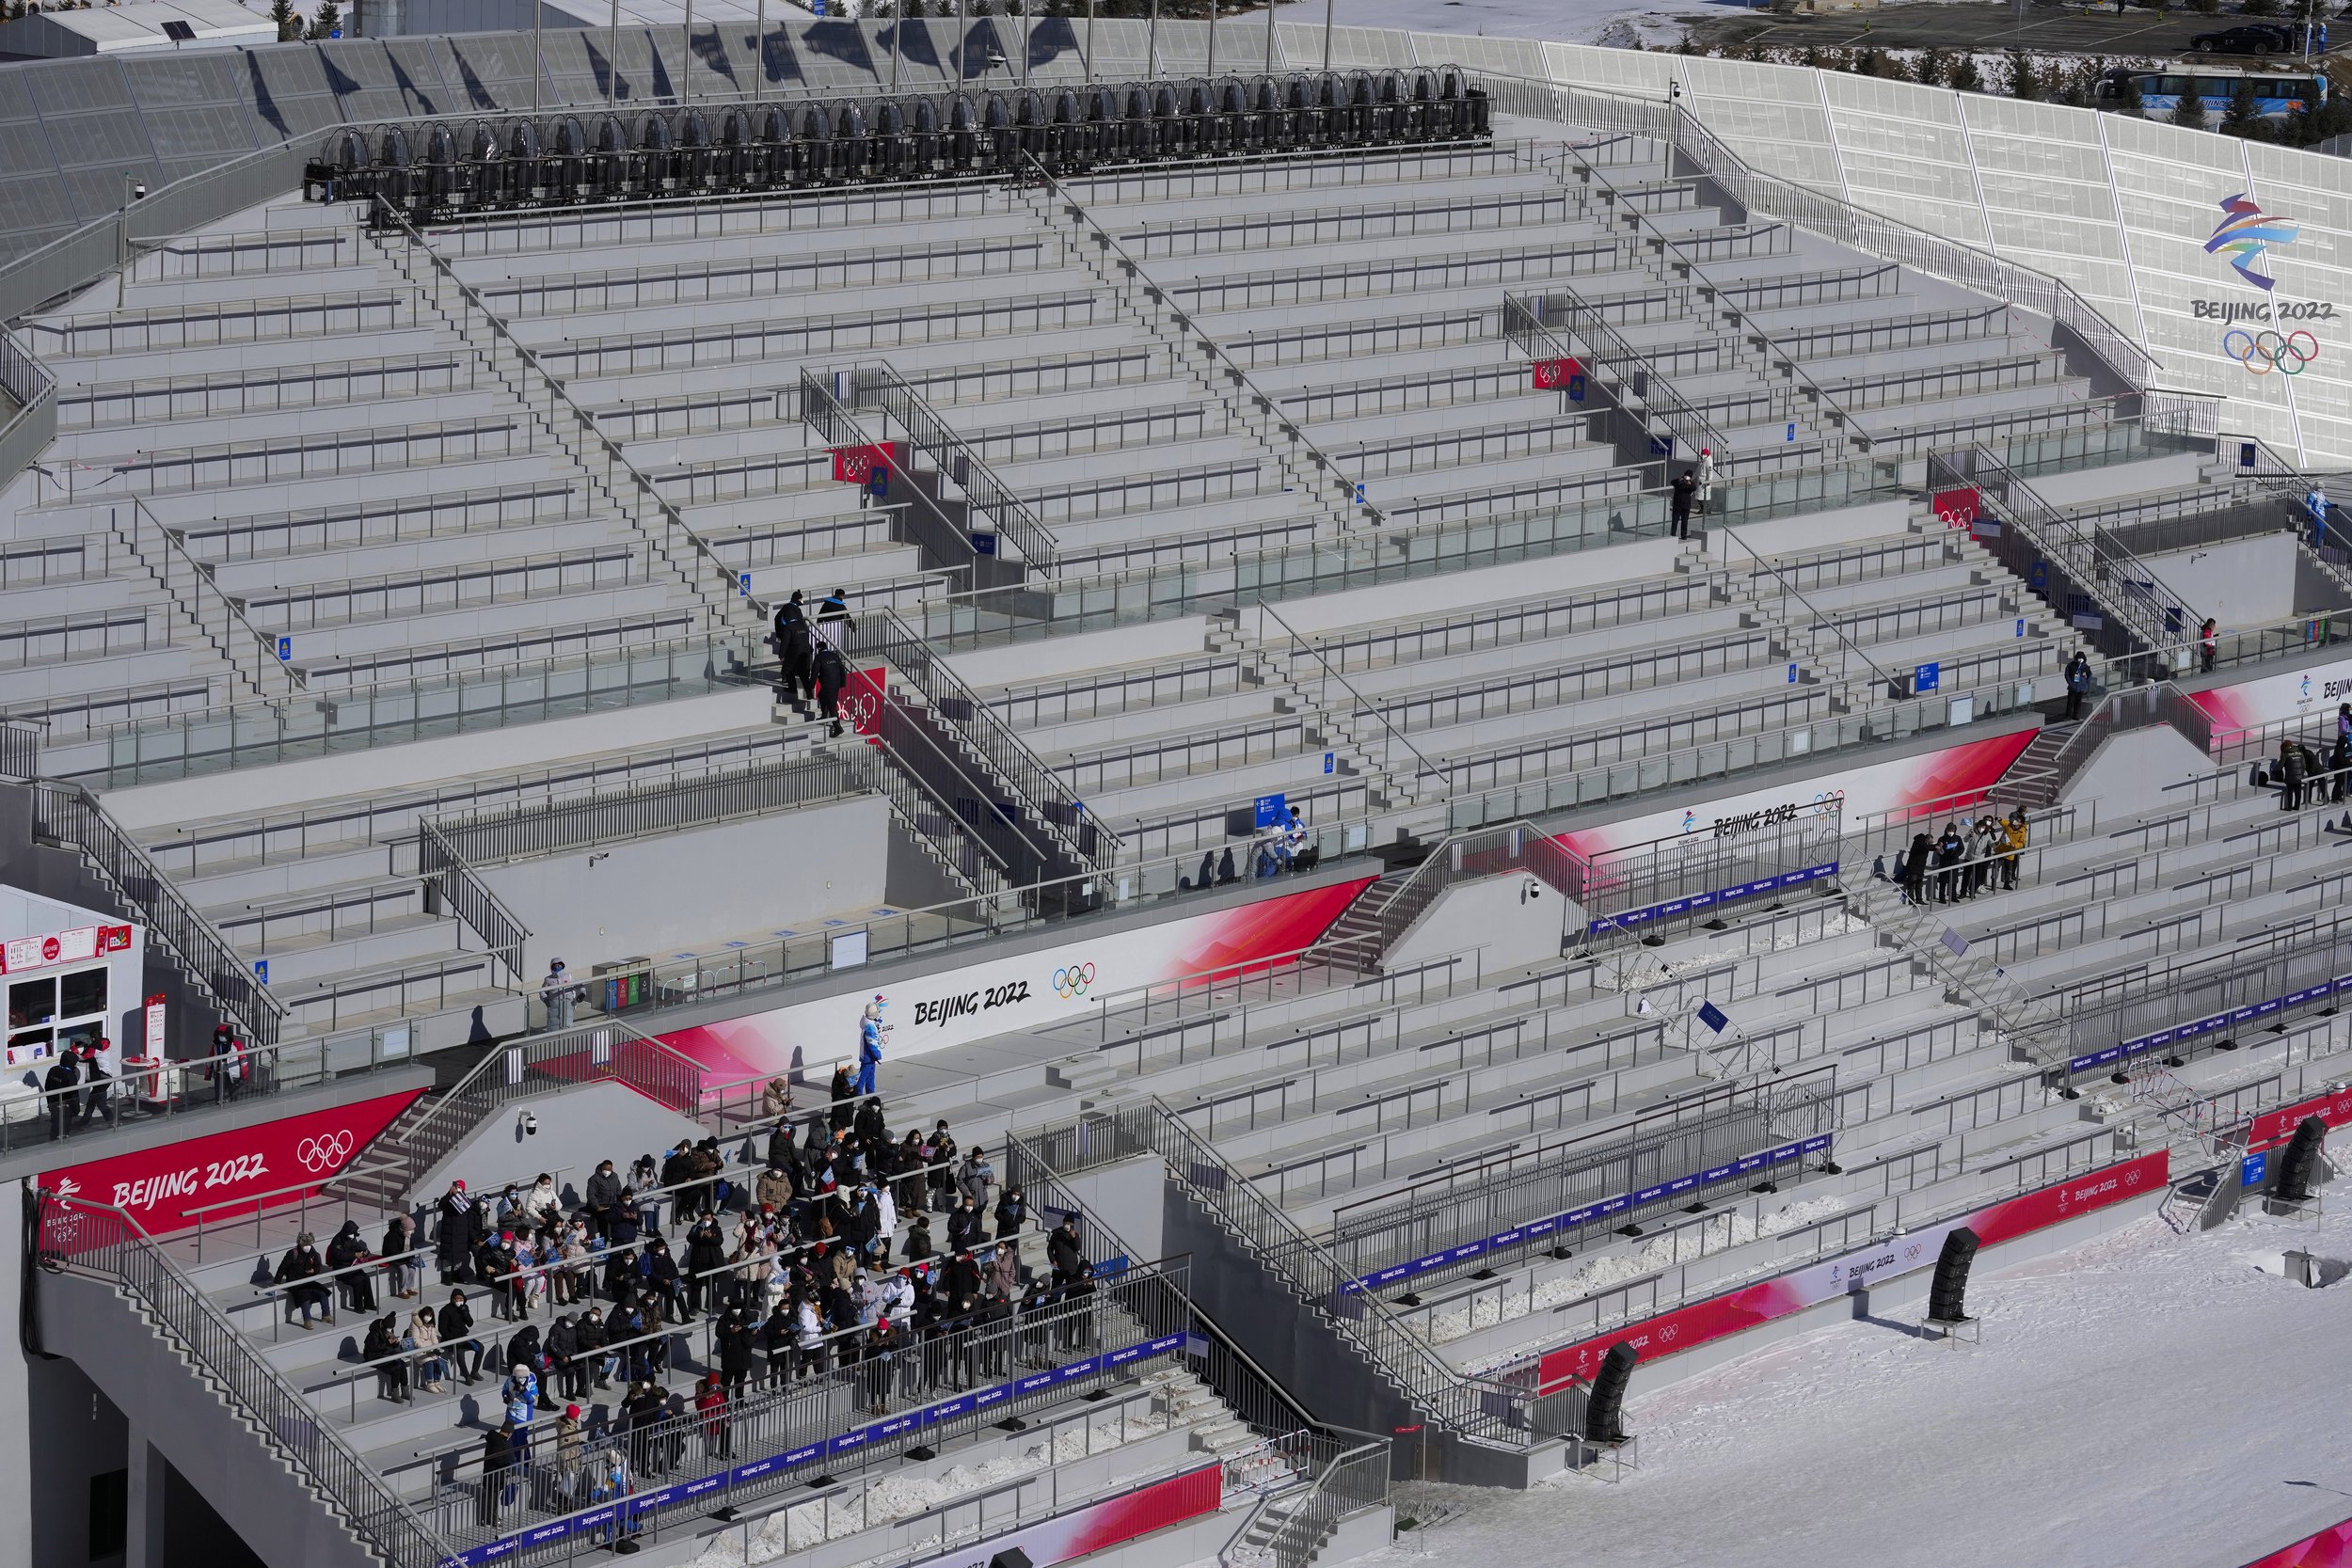  People watch the during the men's normal hill individual ski jumping trial round in a nearly empty Zhangjiakou National Ski Jumping Centre at the 2022 Winter Olympics, Saturday, Feb. 5, 2022, in Zhangjiakou, China. (AP Photo/Andrew Medichini) 